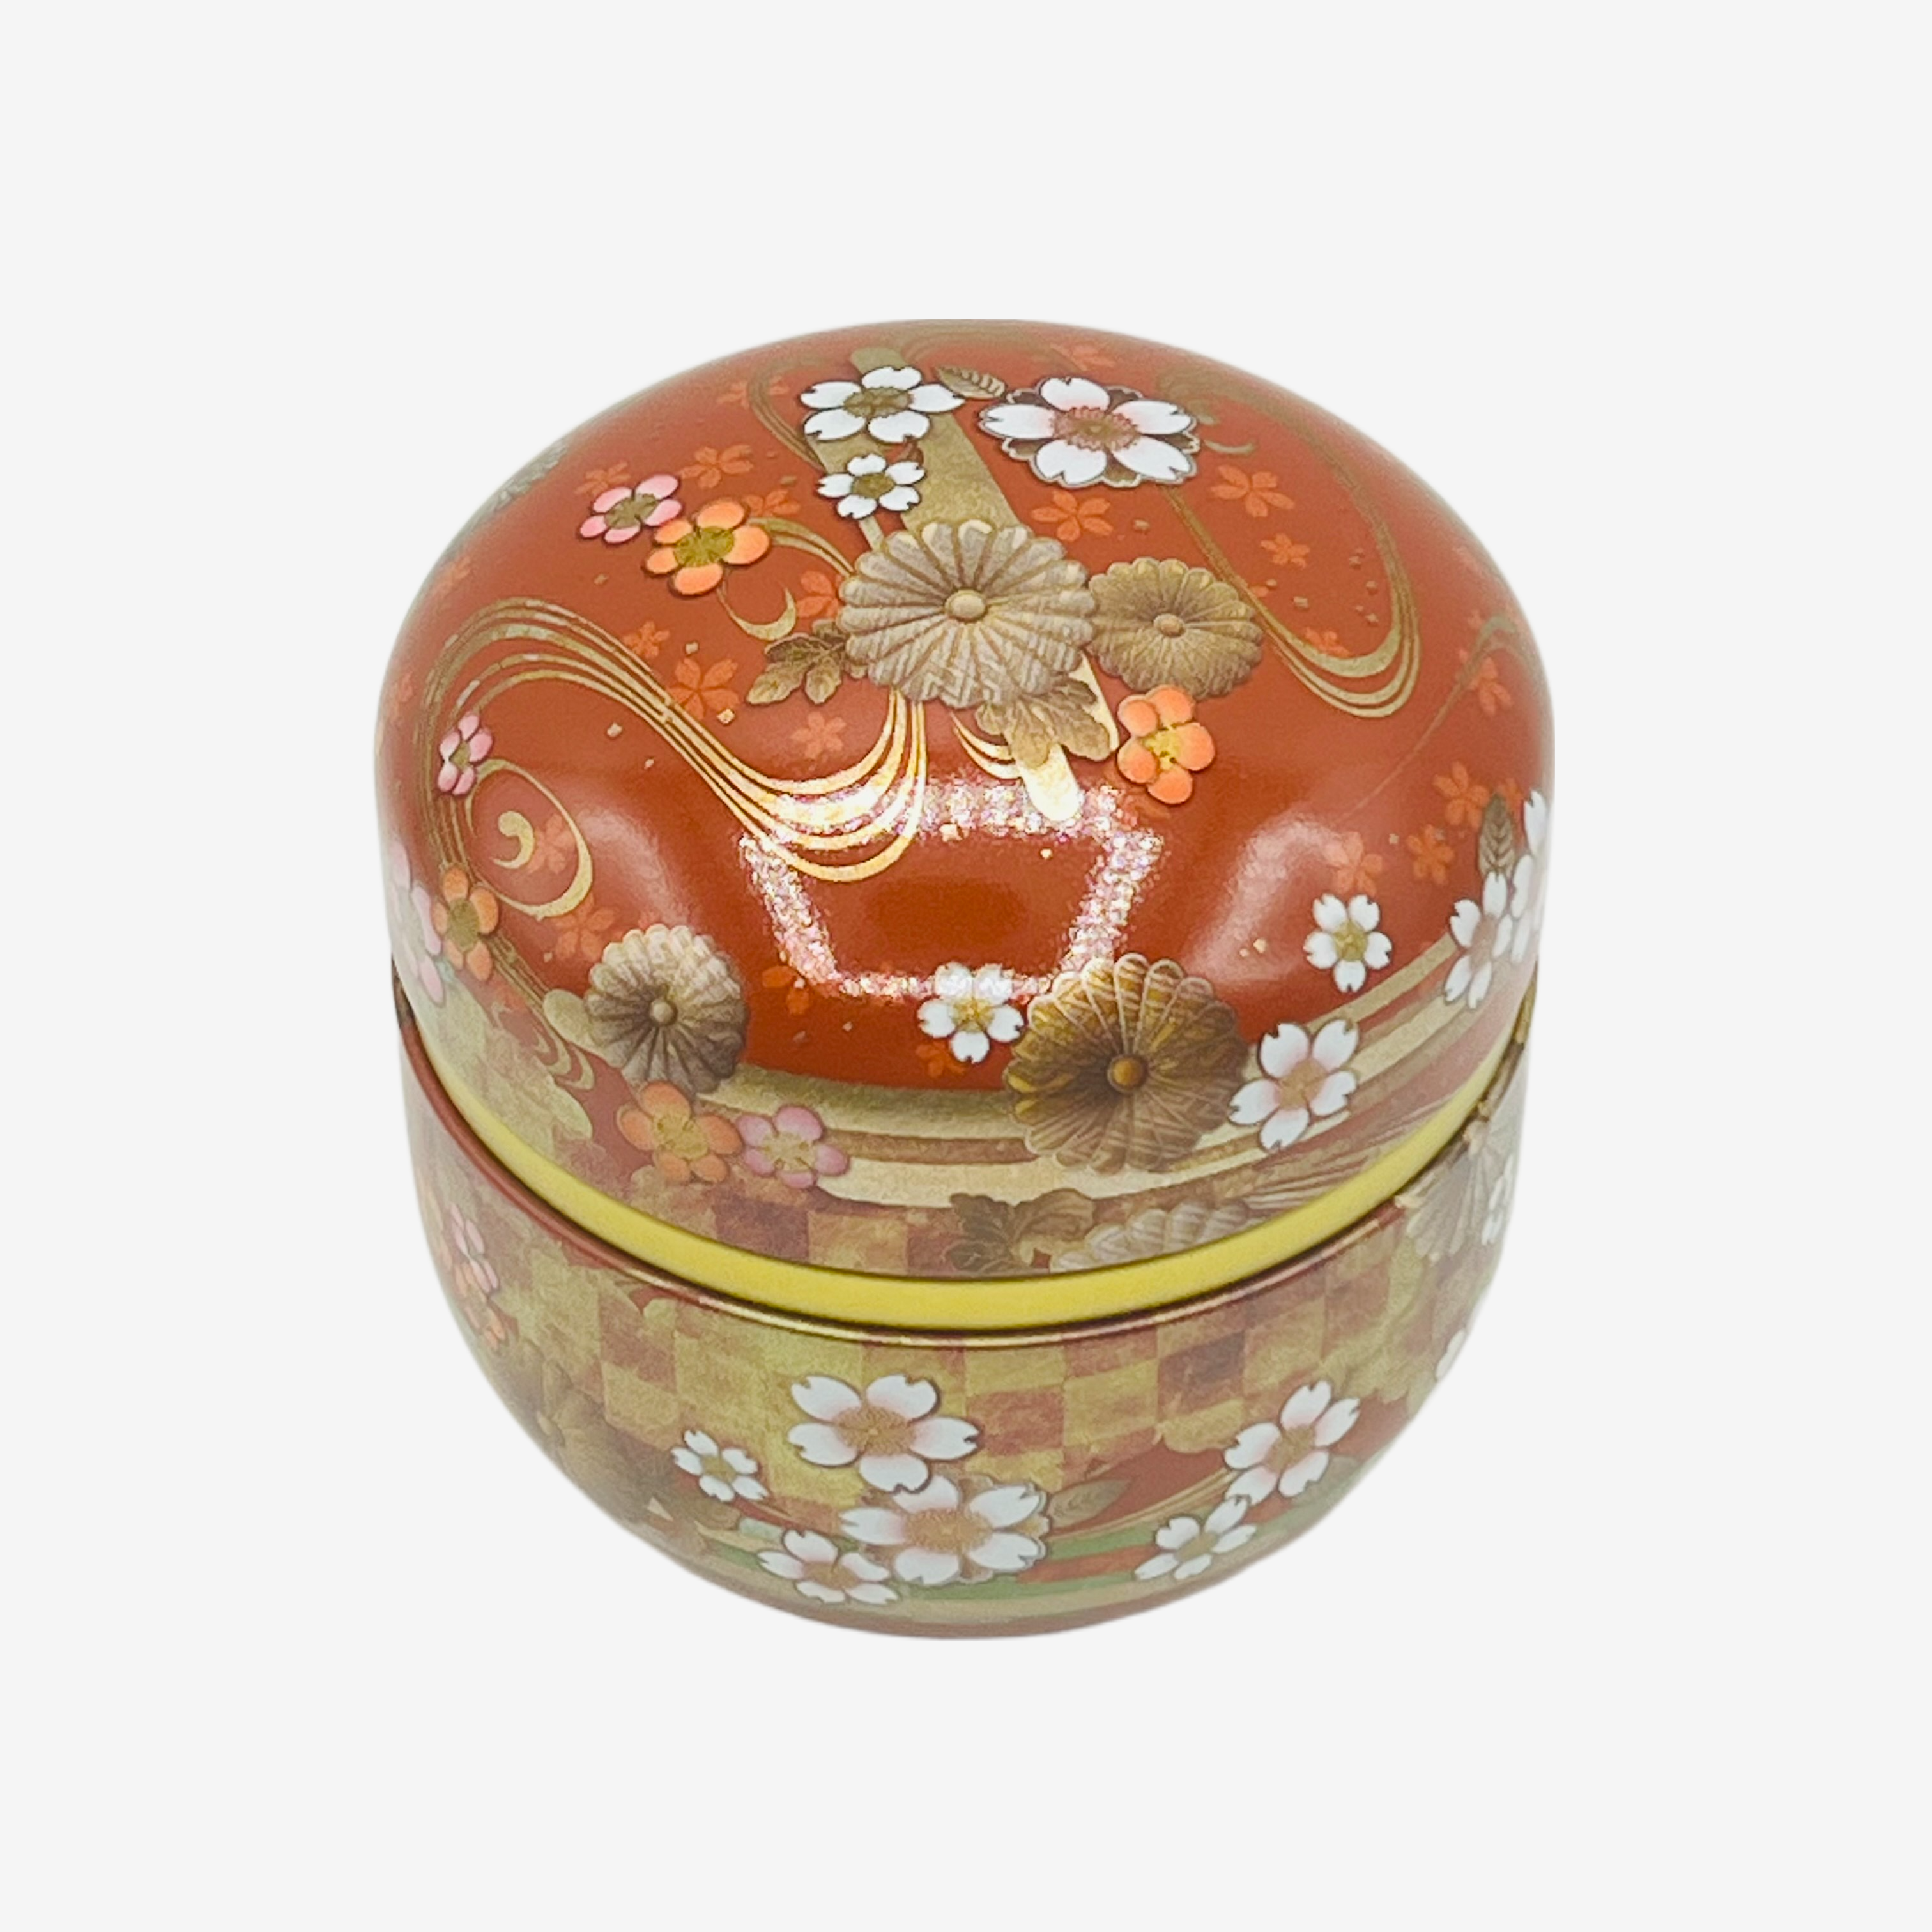 Ito Burgundy Red Metal Tea Canister - Japanese Chazutsu